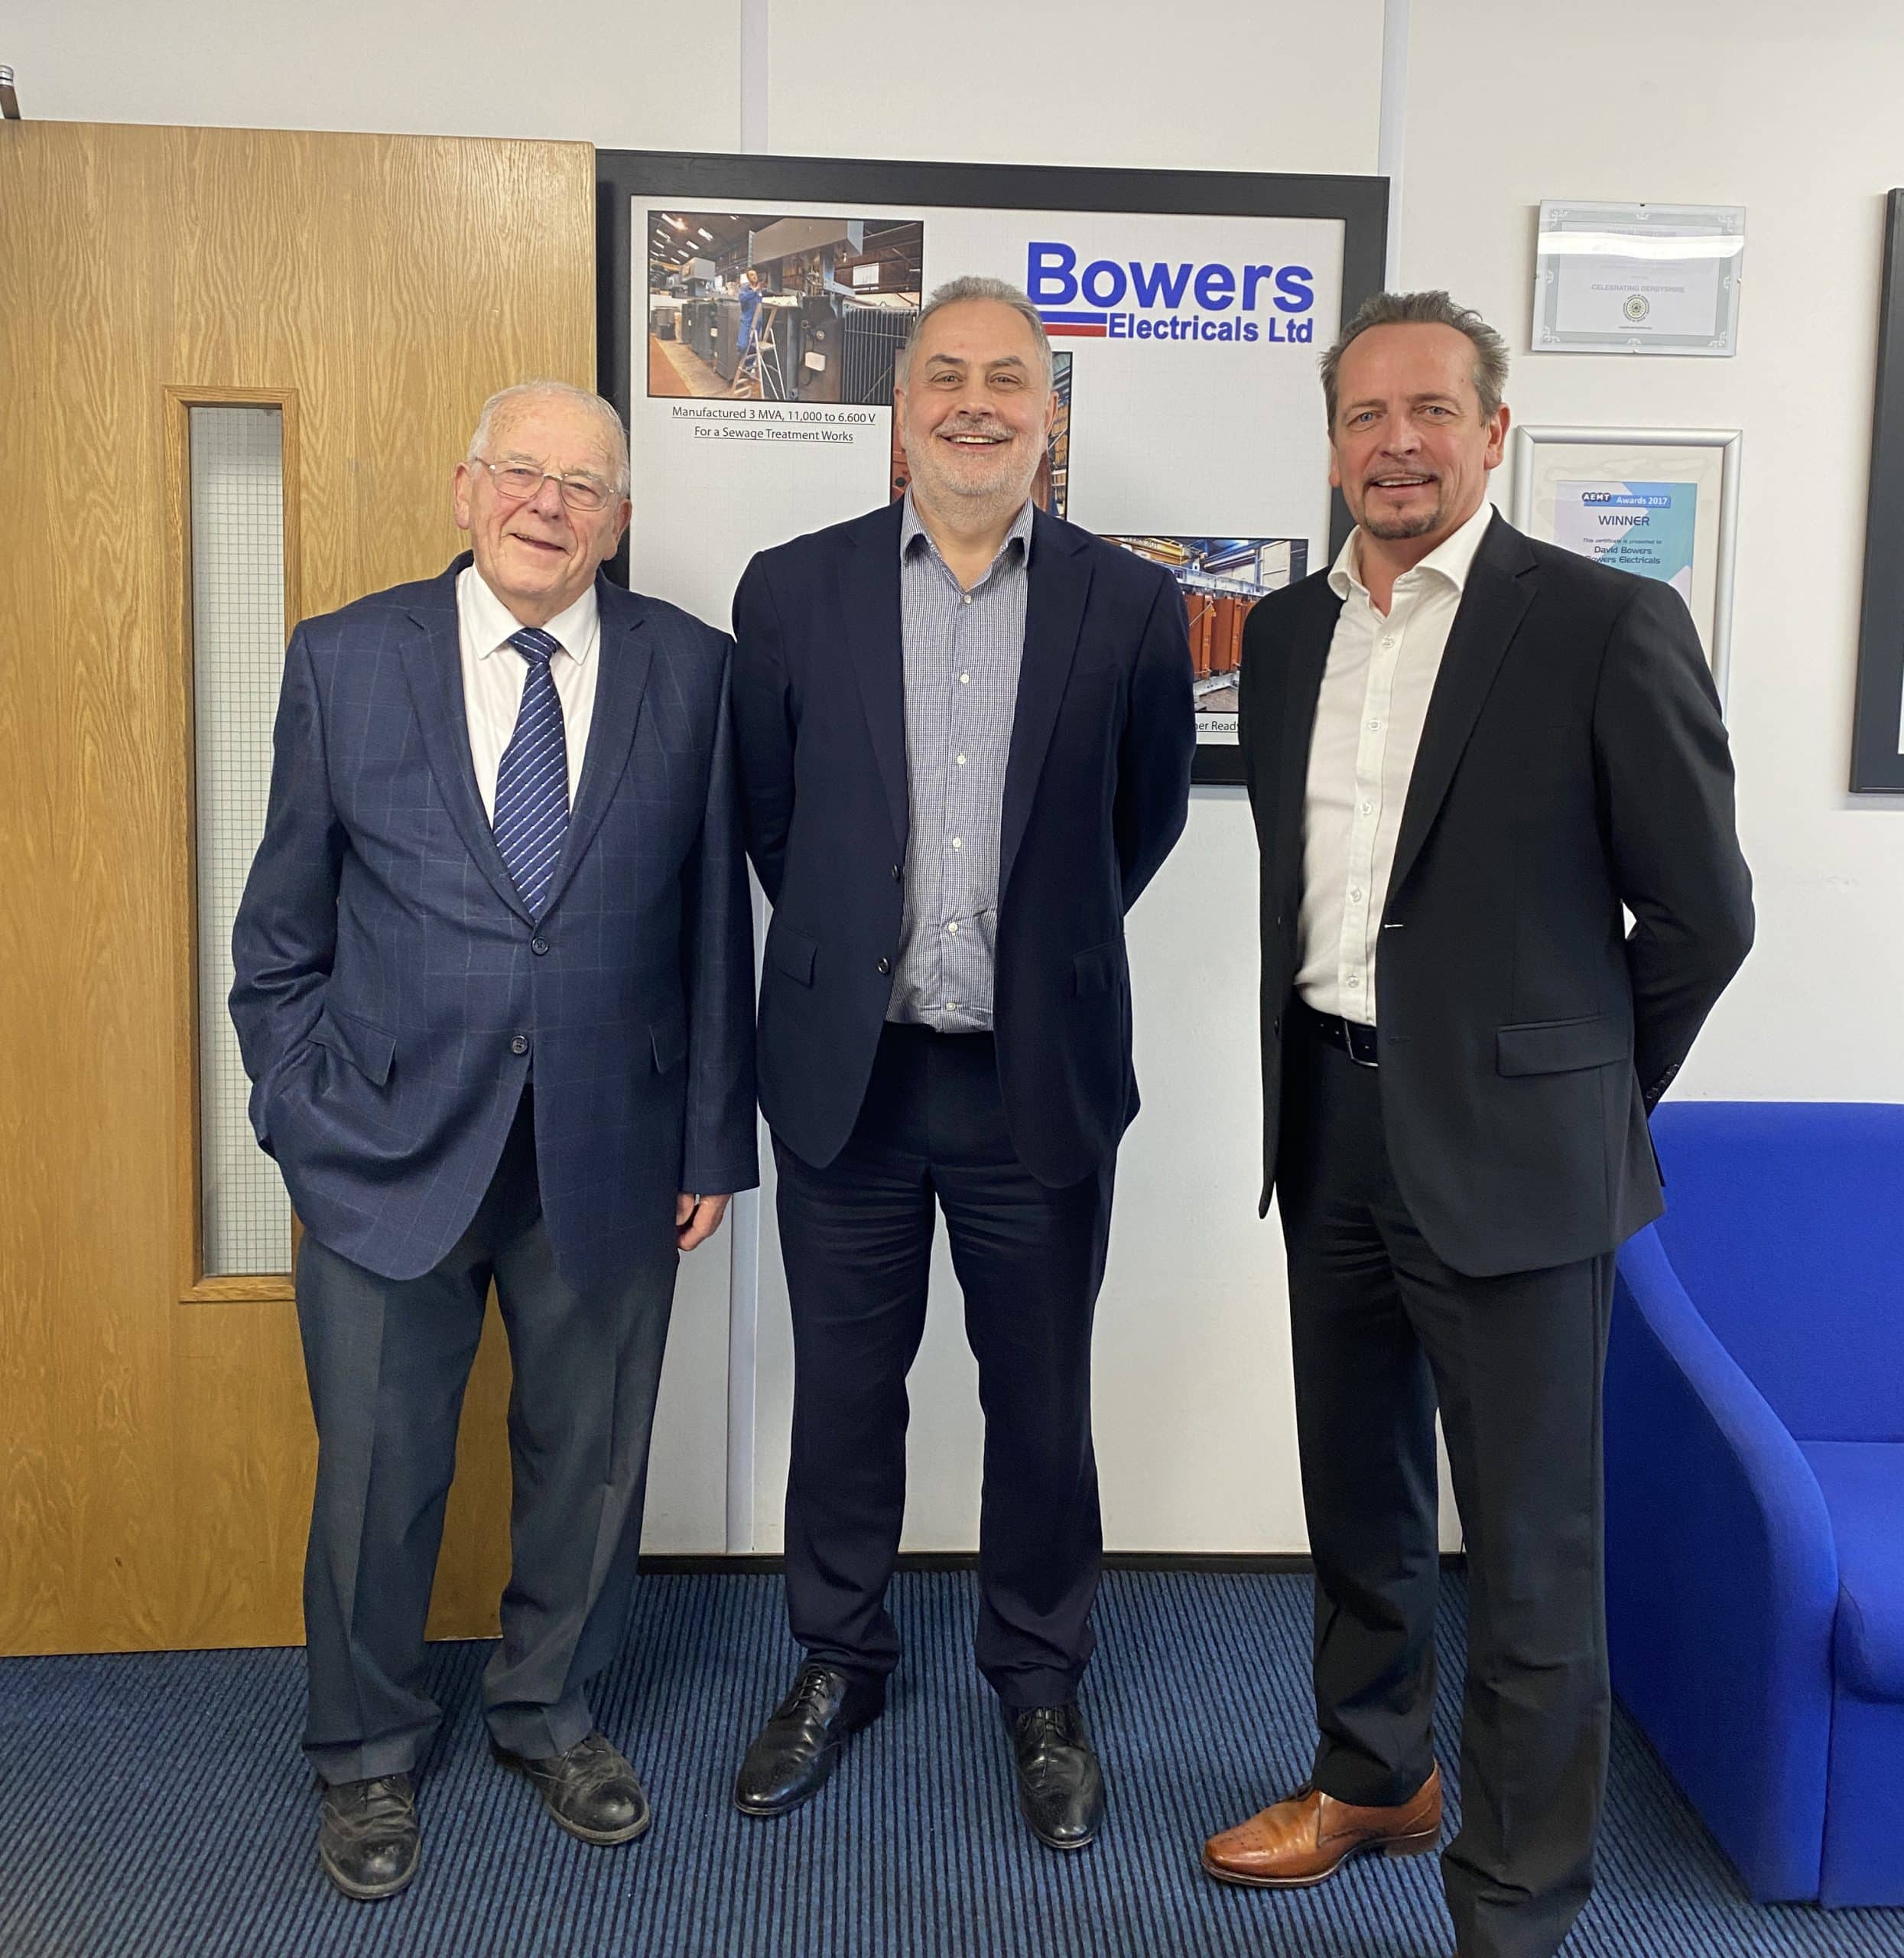 new Managing Director Kevin Chapman, with CEO, Michael Bowers and Chairman, David Bowers.